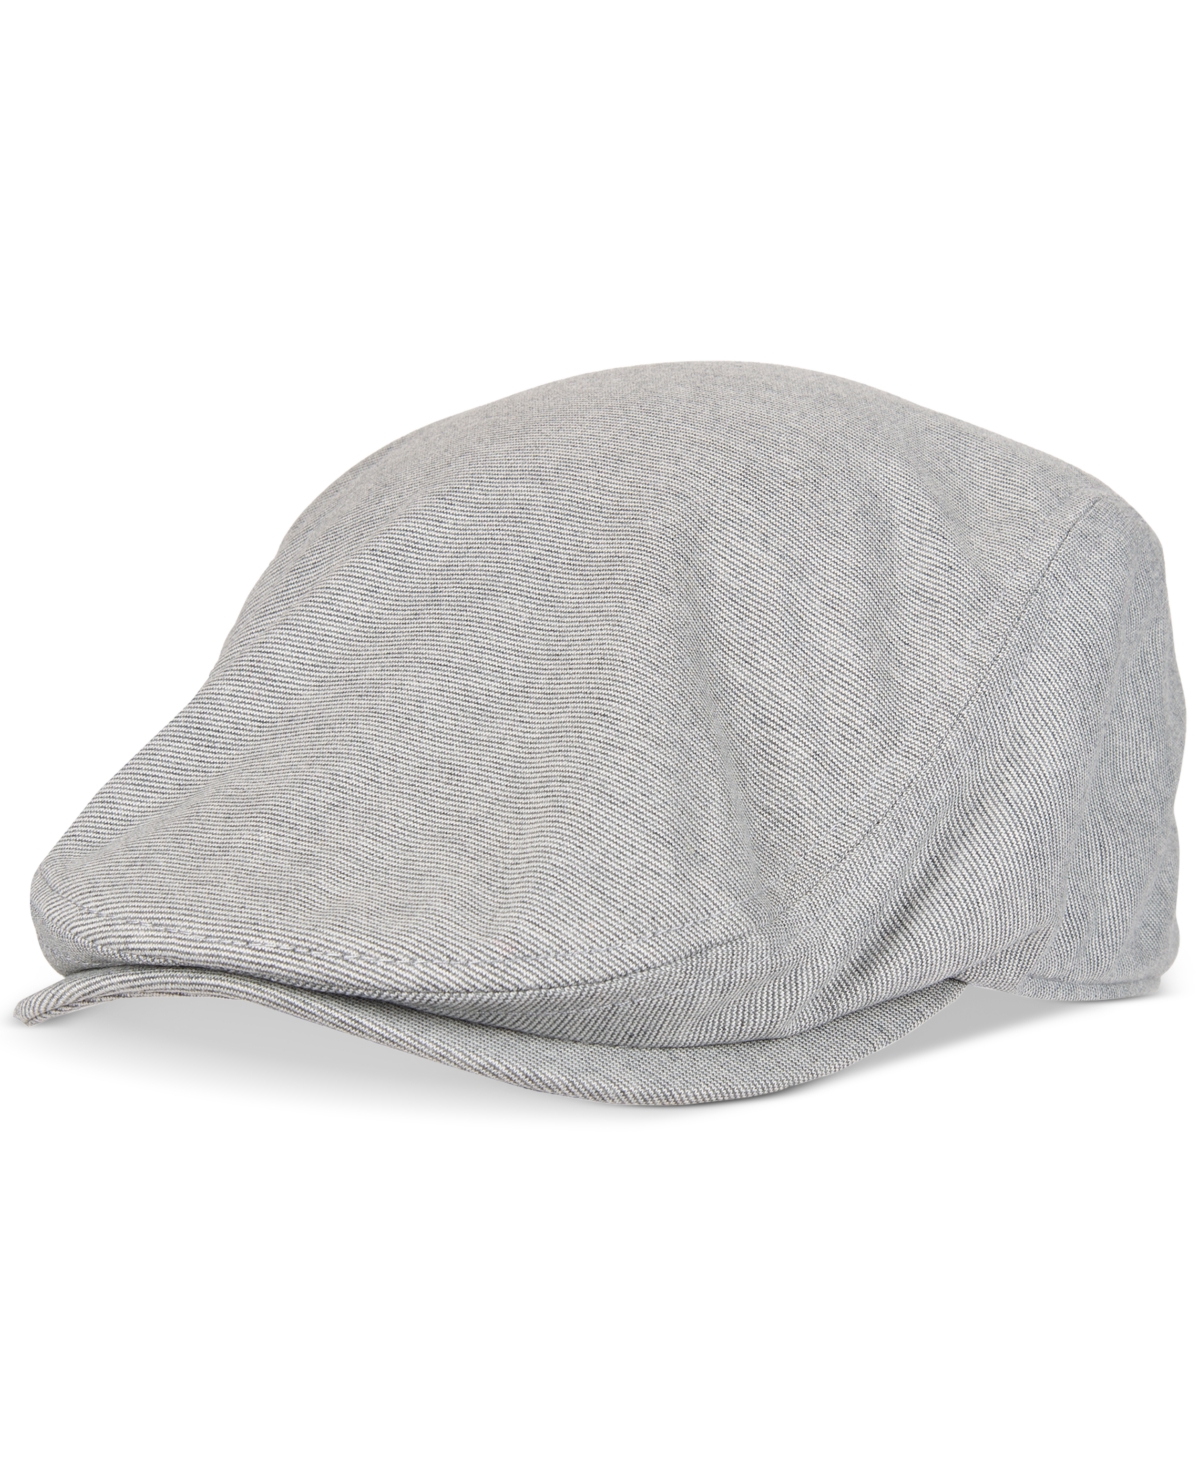 Levi's Men's Stretch Flat Top Mesh Lined Ivy Hat In Gray